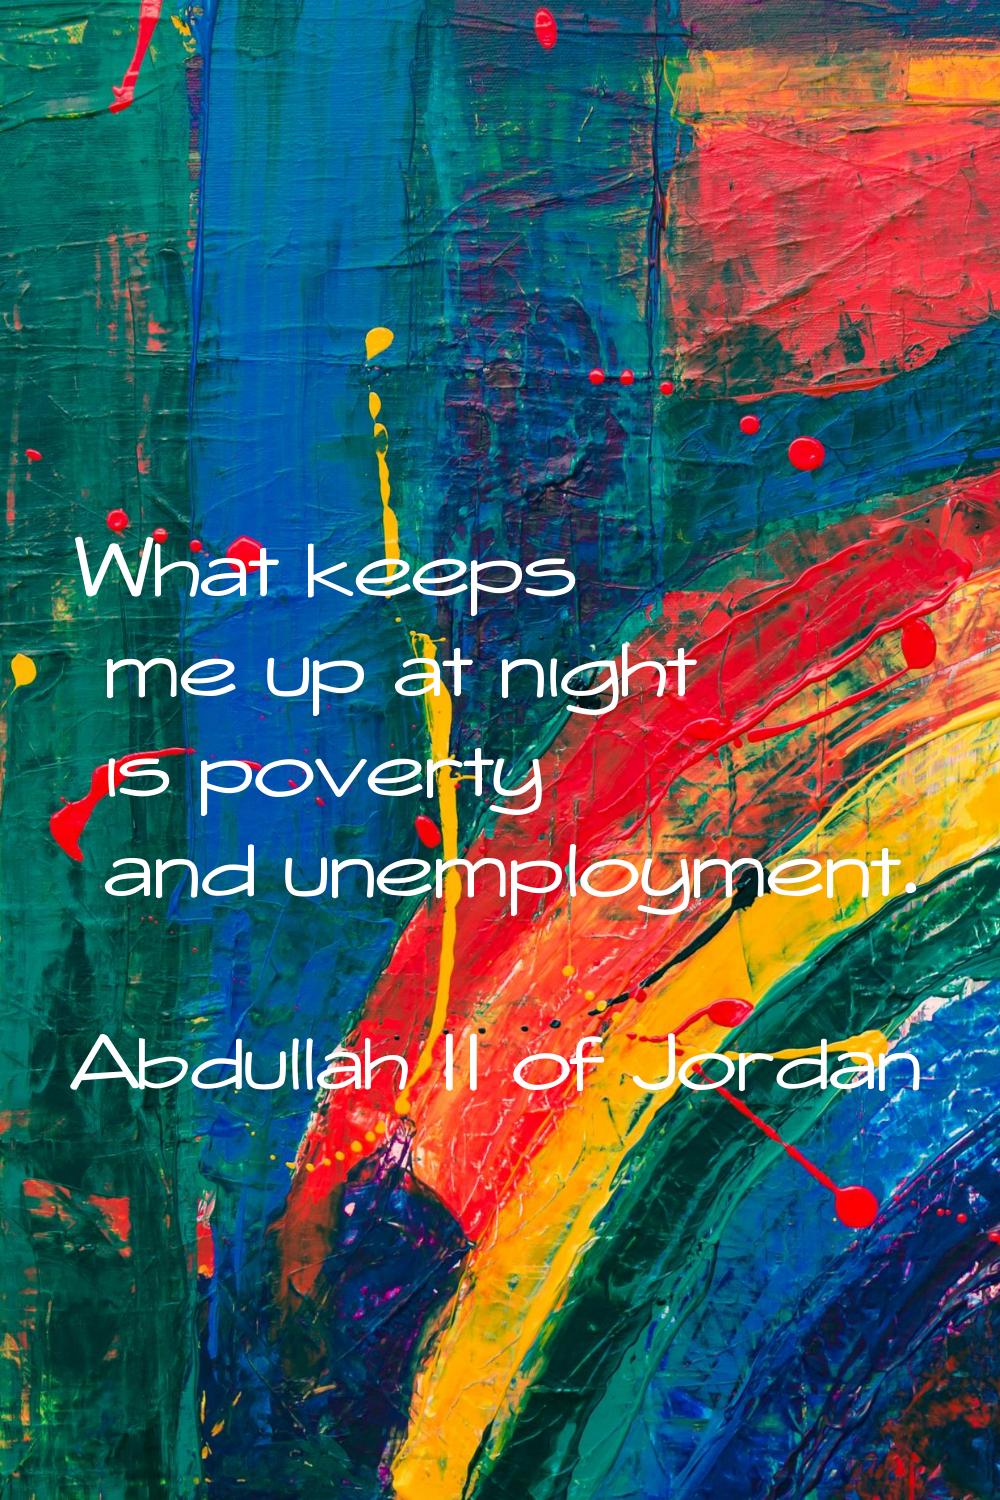 What keeps me up at night is poverty and unemployment.